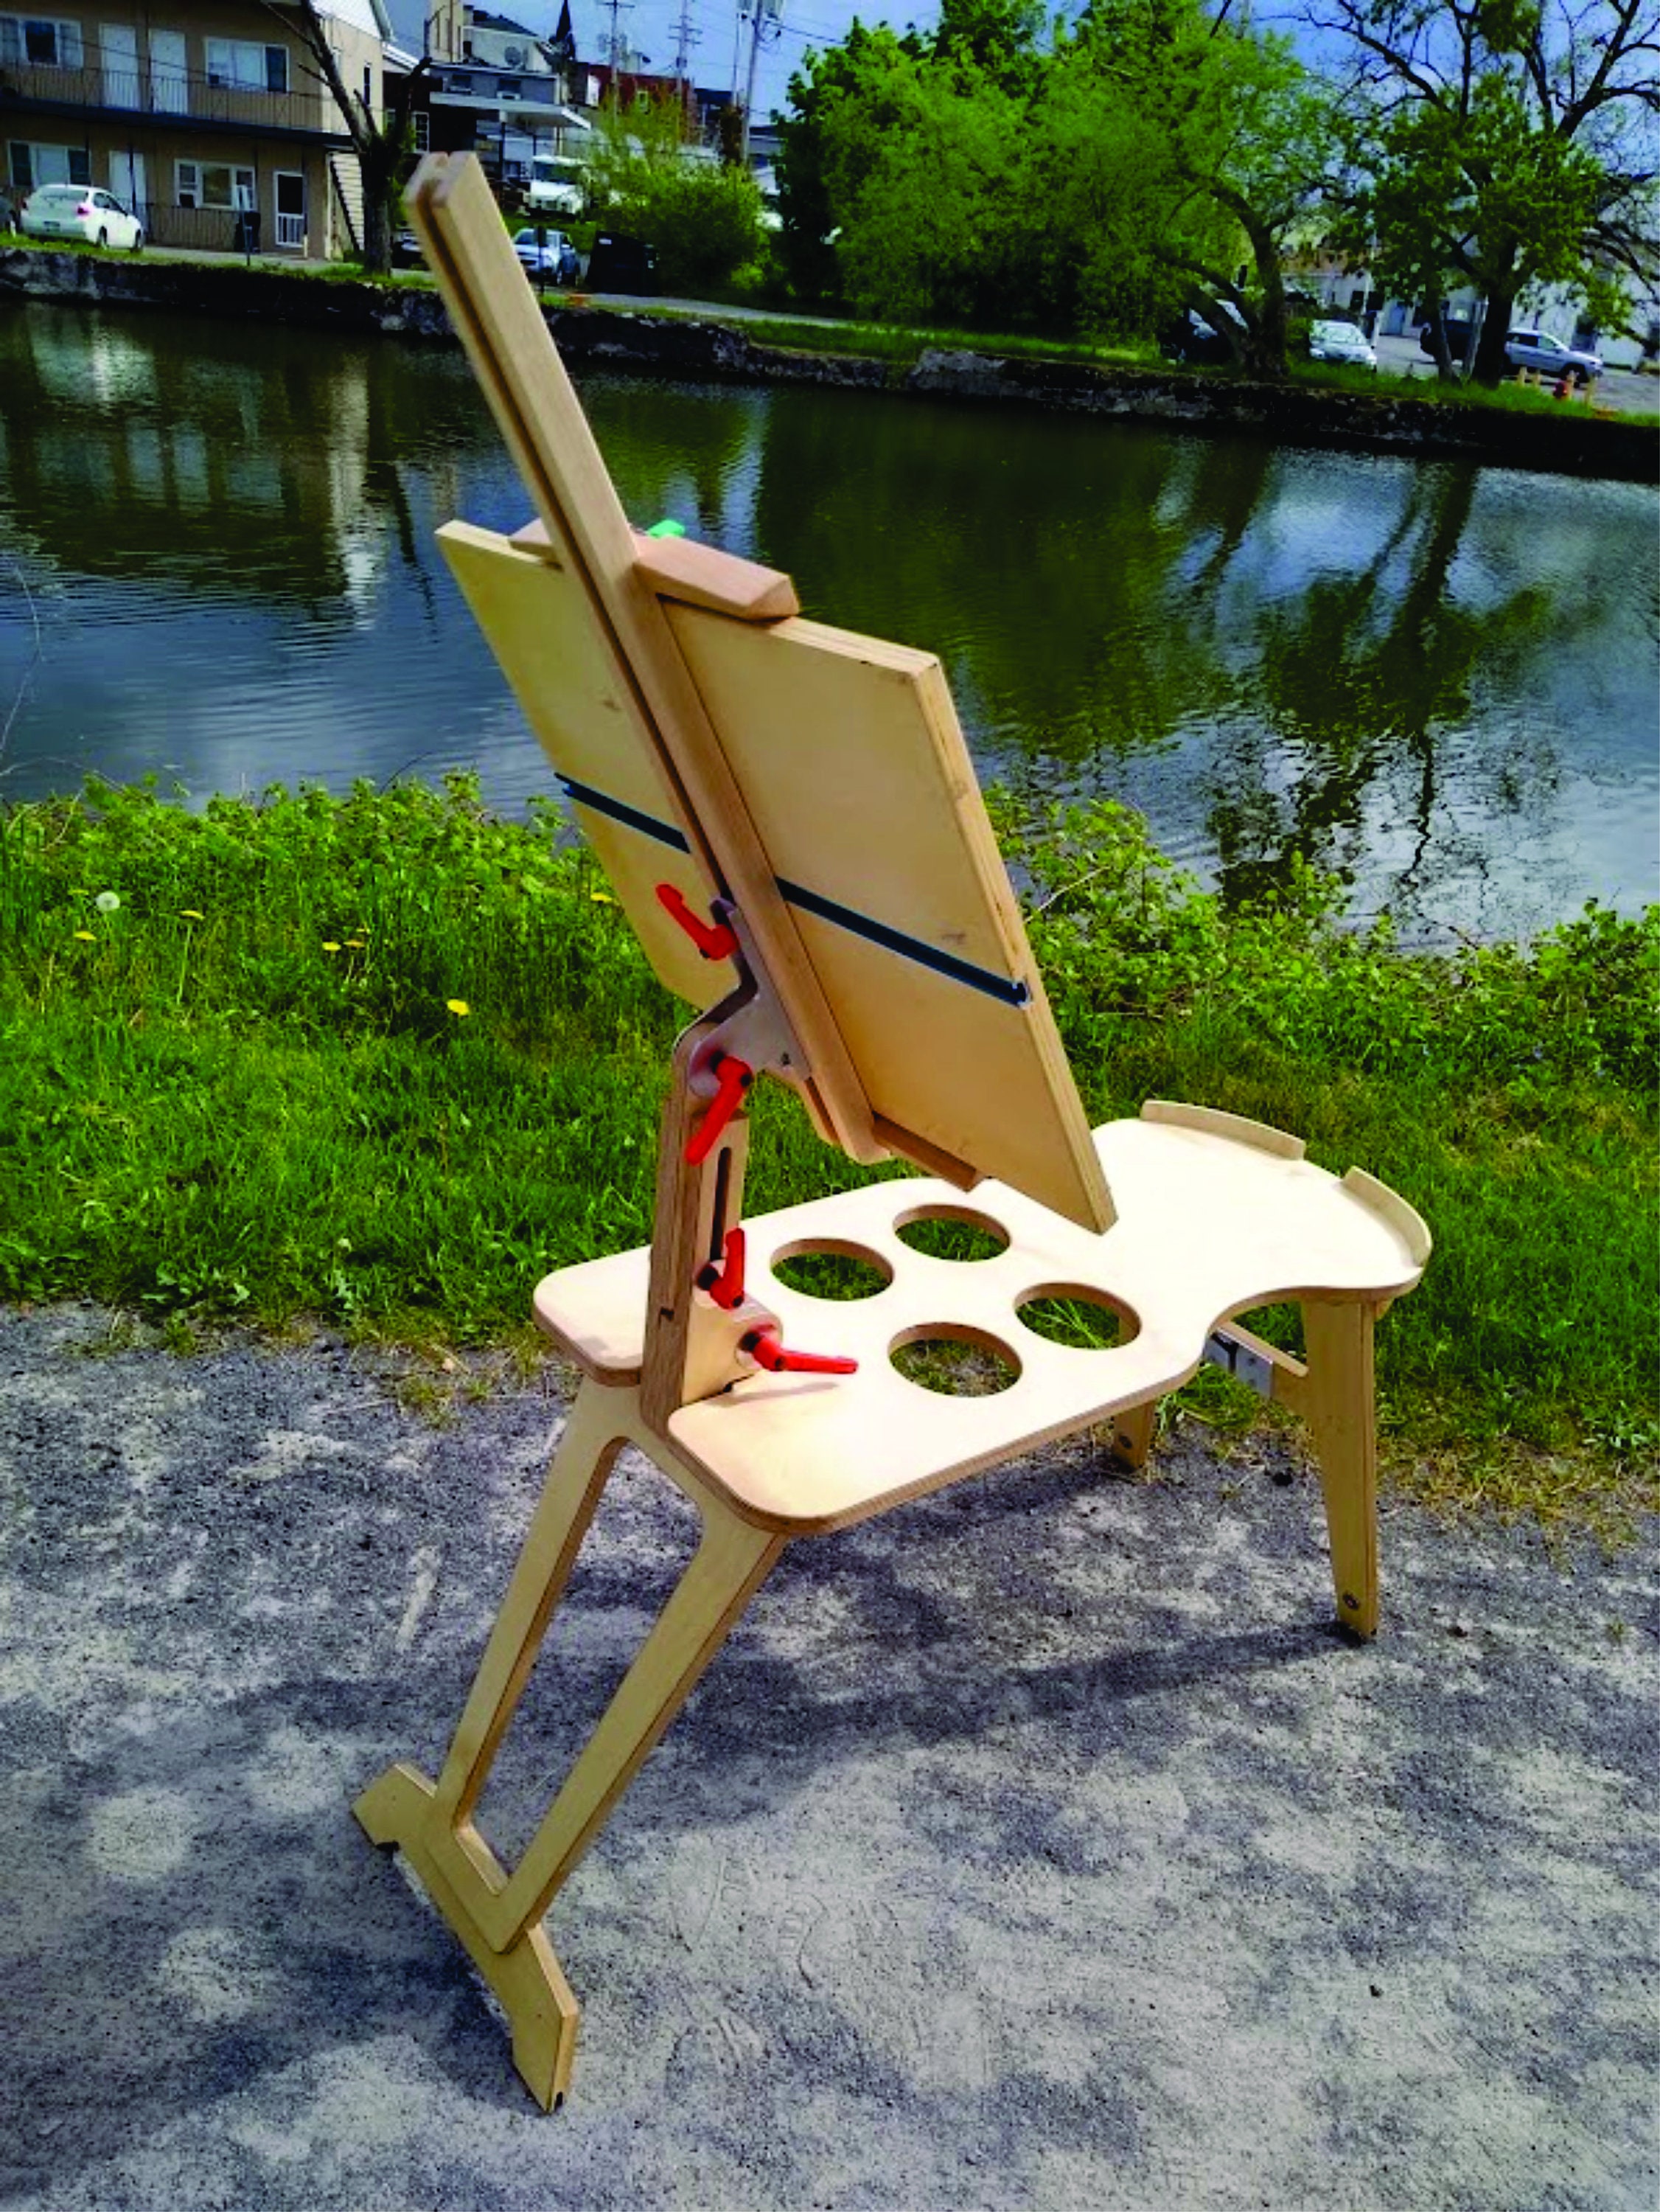 Solid Wood Travel Easel Can Be Tiled Display Can Be Connected to a Tripod  Link Action Camera Gift for the Artist 